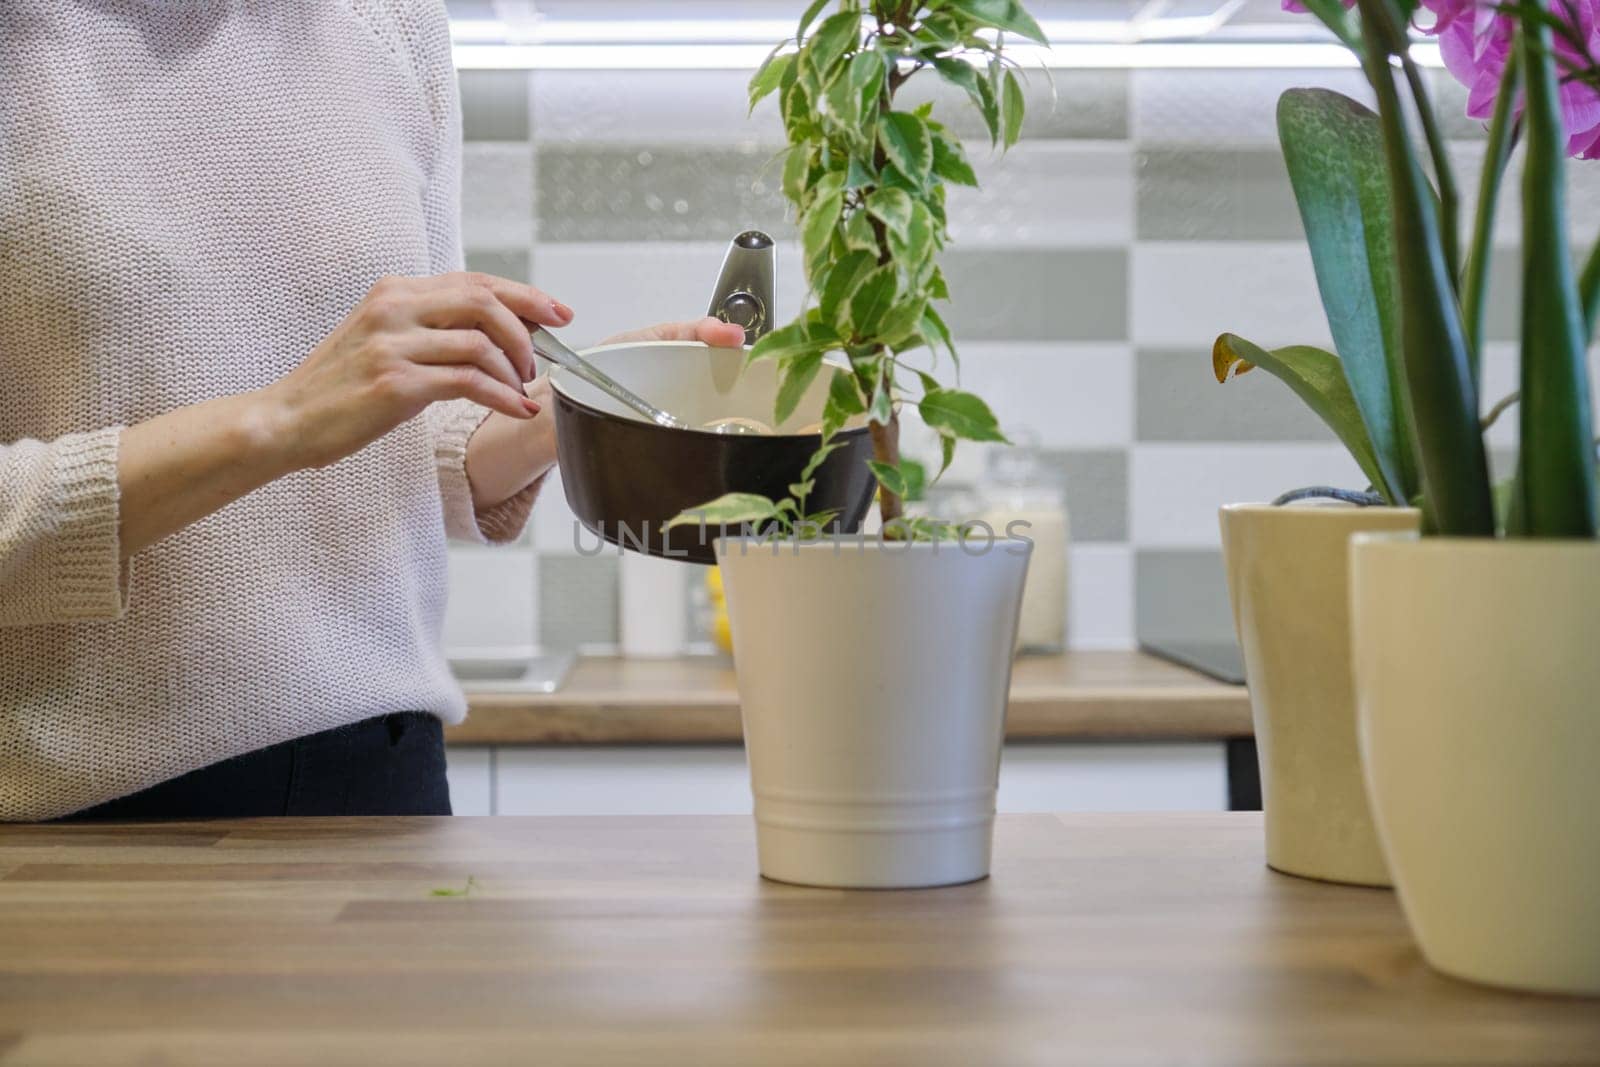 Natural fertilizer water after boiling eggs, woman watering plant in pot by VH-studio